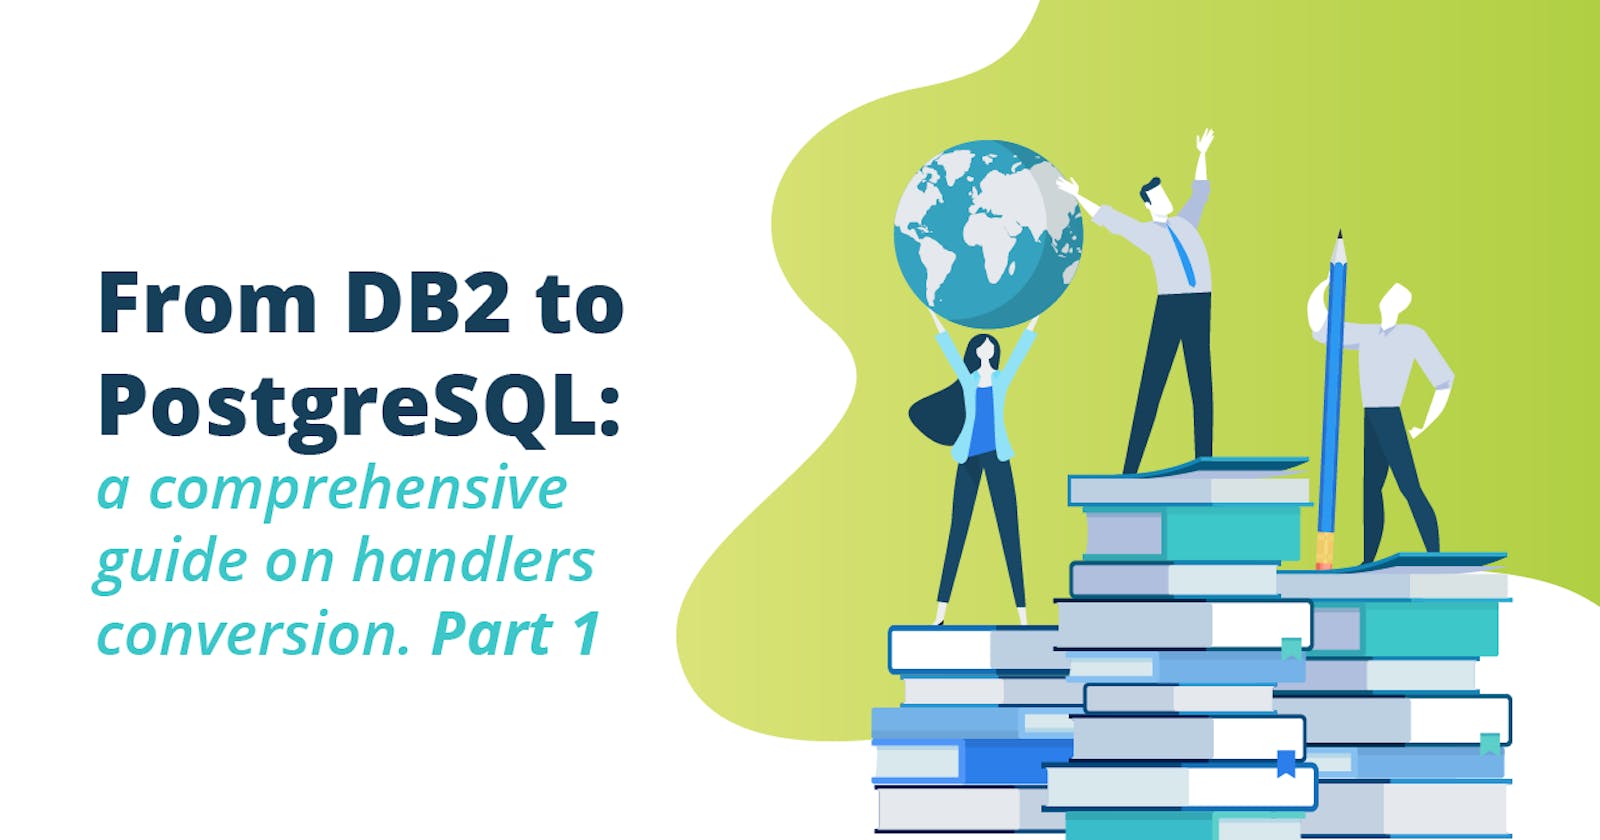 From DB2 to PostgreSQL: a comprehensive guide on handlers conversion. Part 1